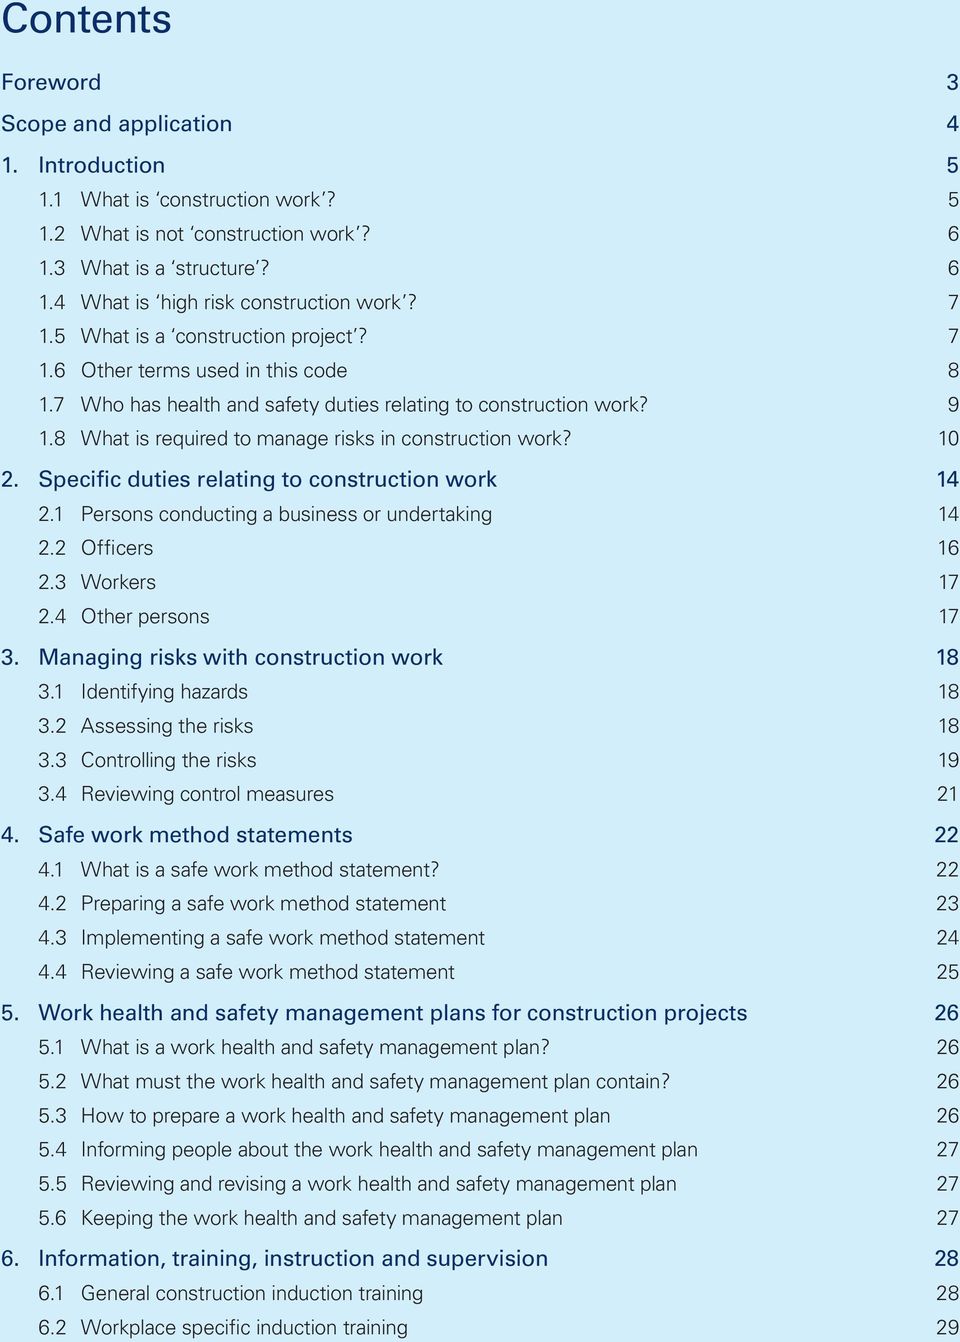 8 What is required to manage risks in construction work? 10 2. Specific duties relating to construction work 14 2.1 Persons conducting a business or undertaking 14 2.2 Officers 16 2.3 Workers 17 2.